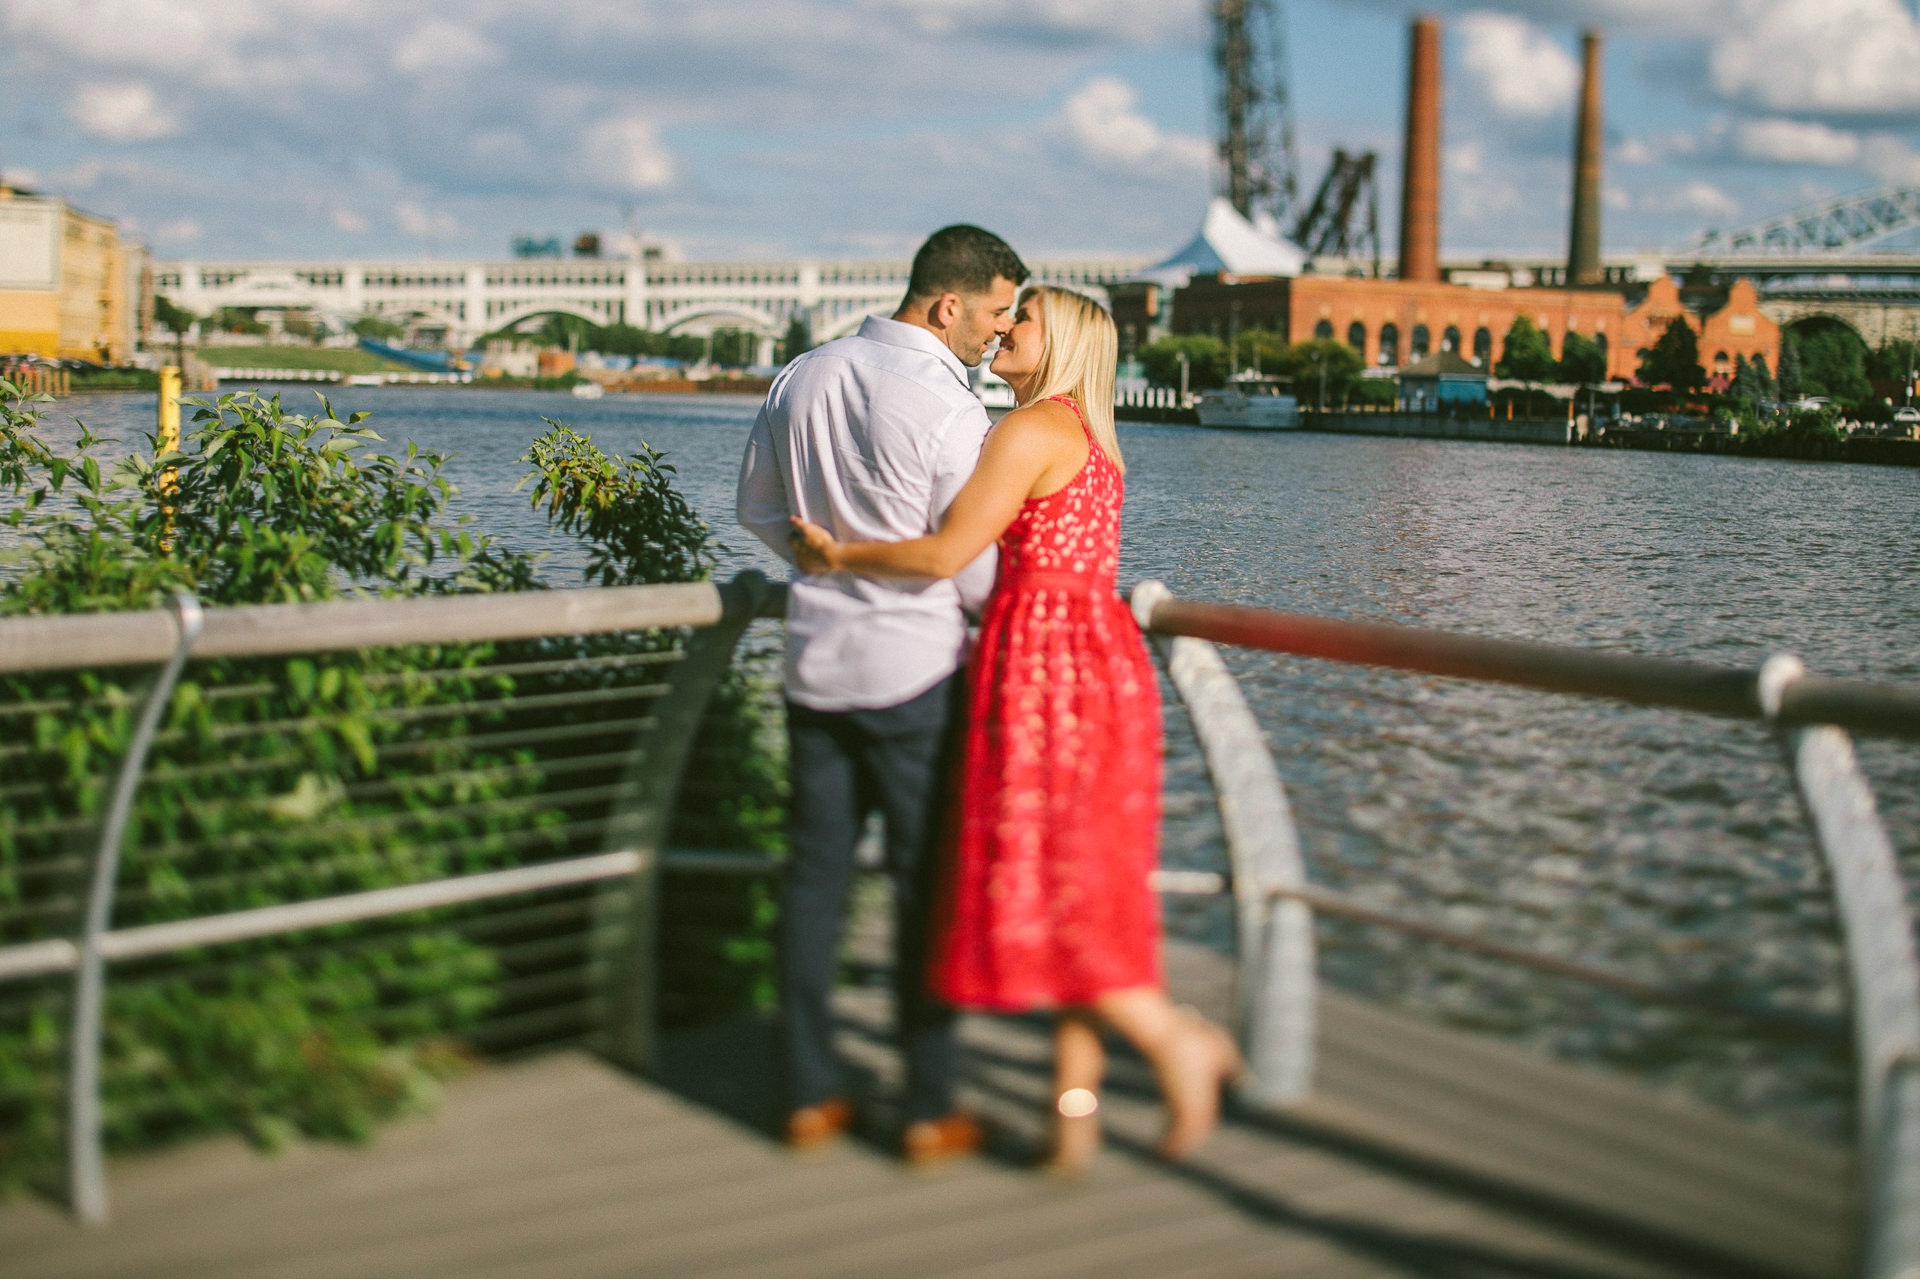 Sara Shookman Angelo DiFranco Engagement photos in cleveland by too much awesomeness photography 5.jpg